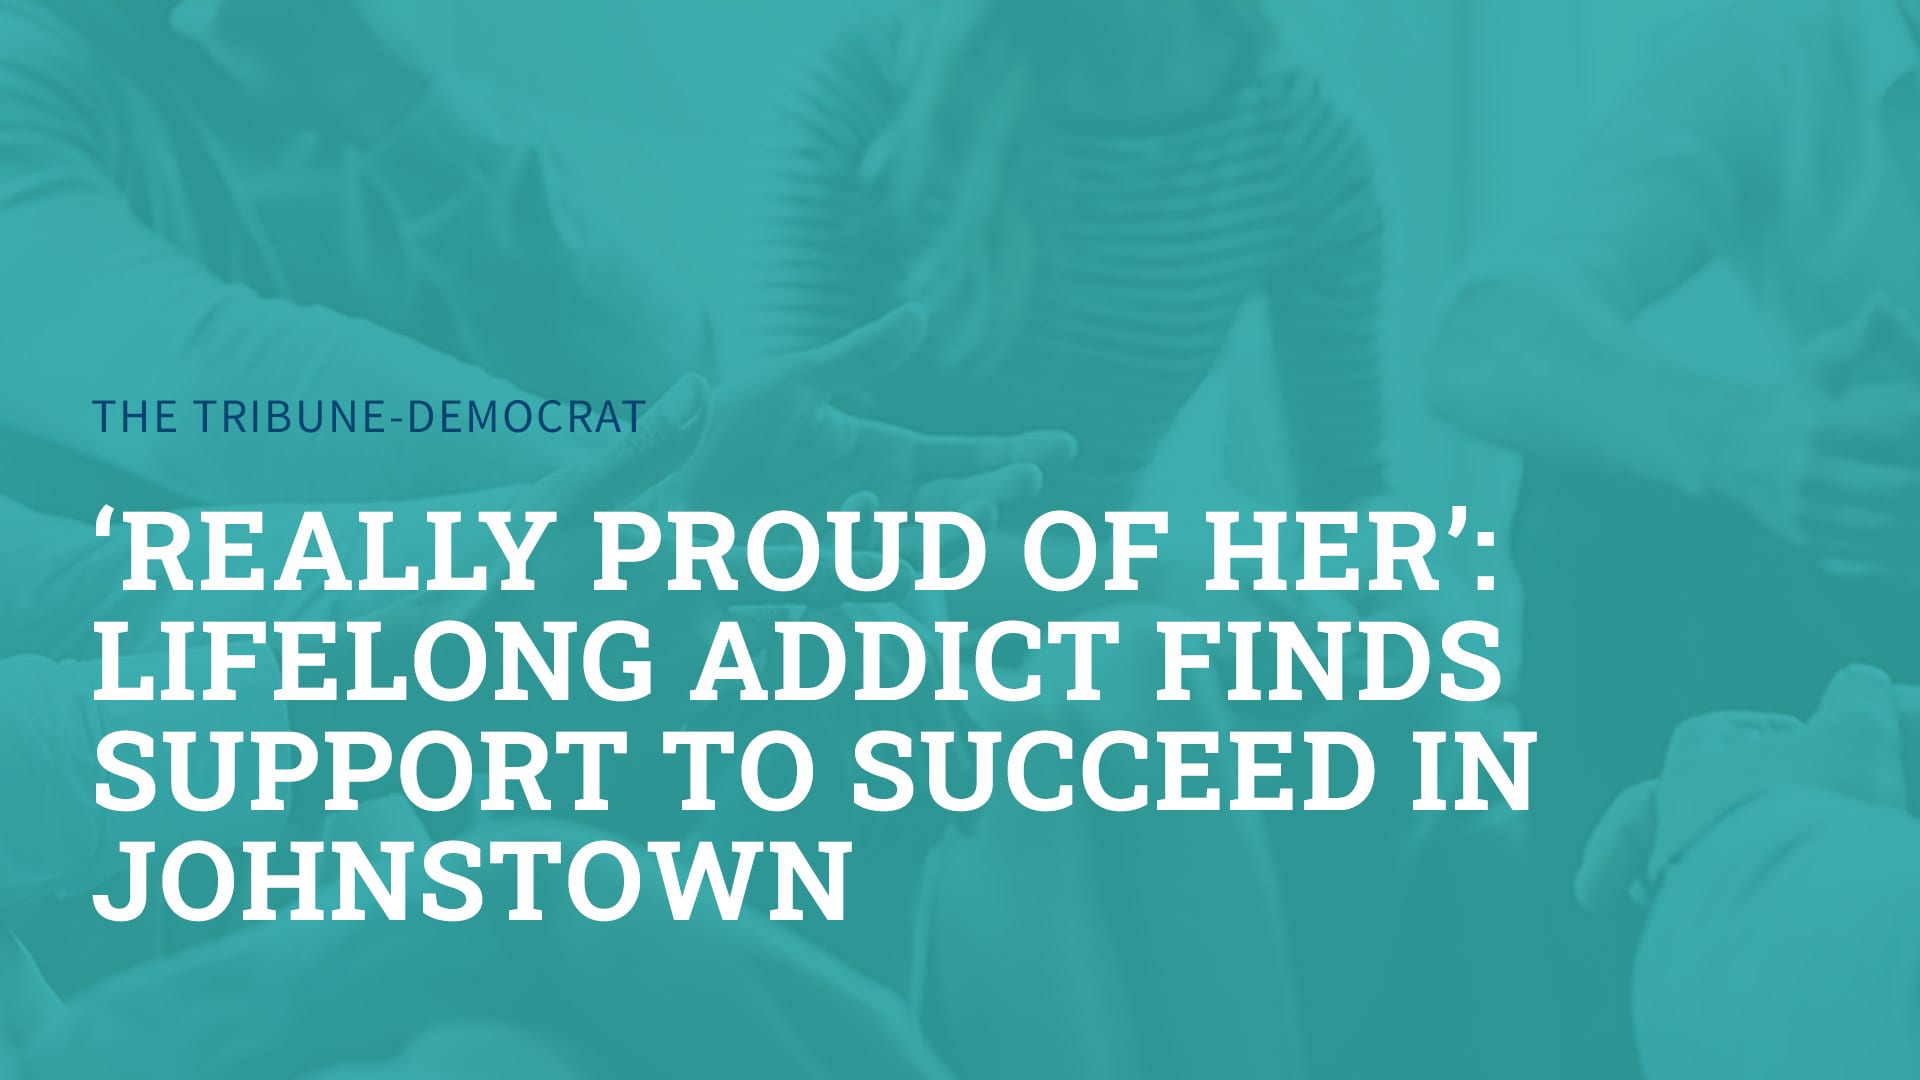 really proud of her lifelong addict finds support to succeed in johnstown